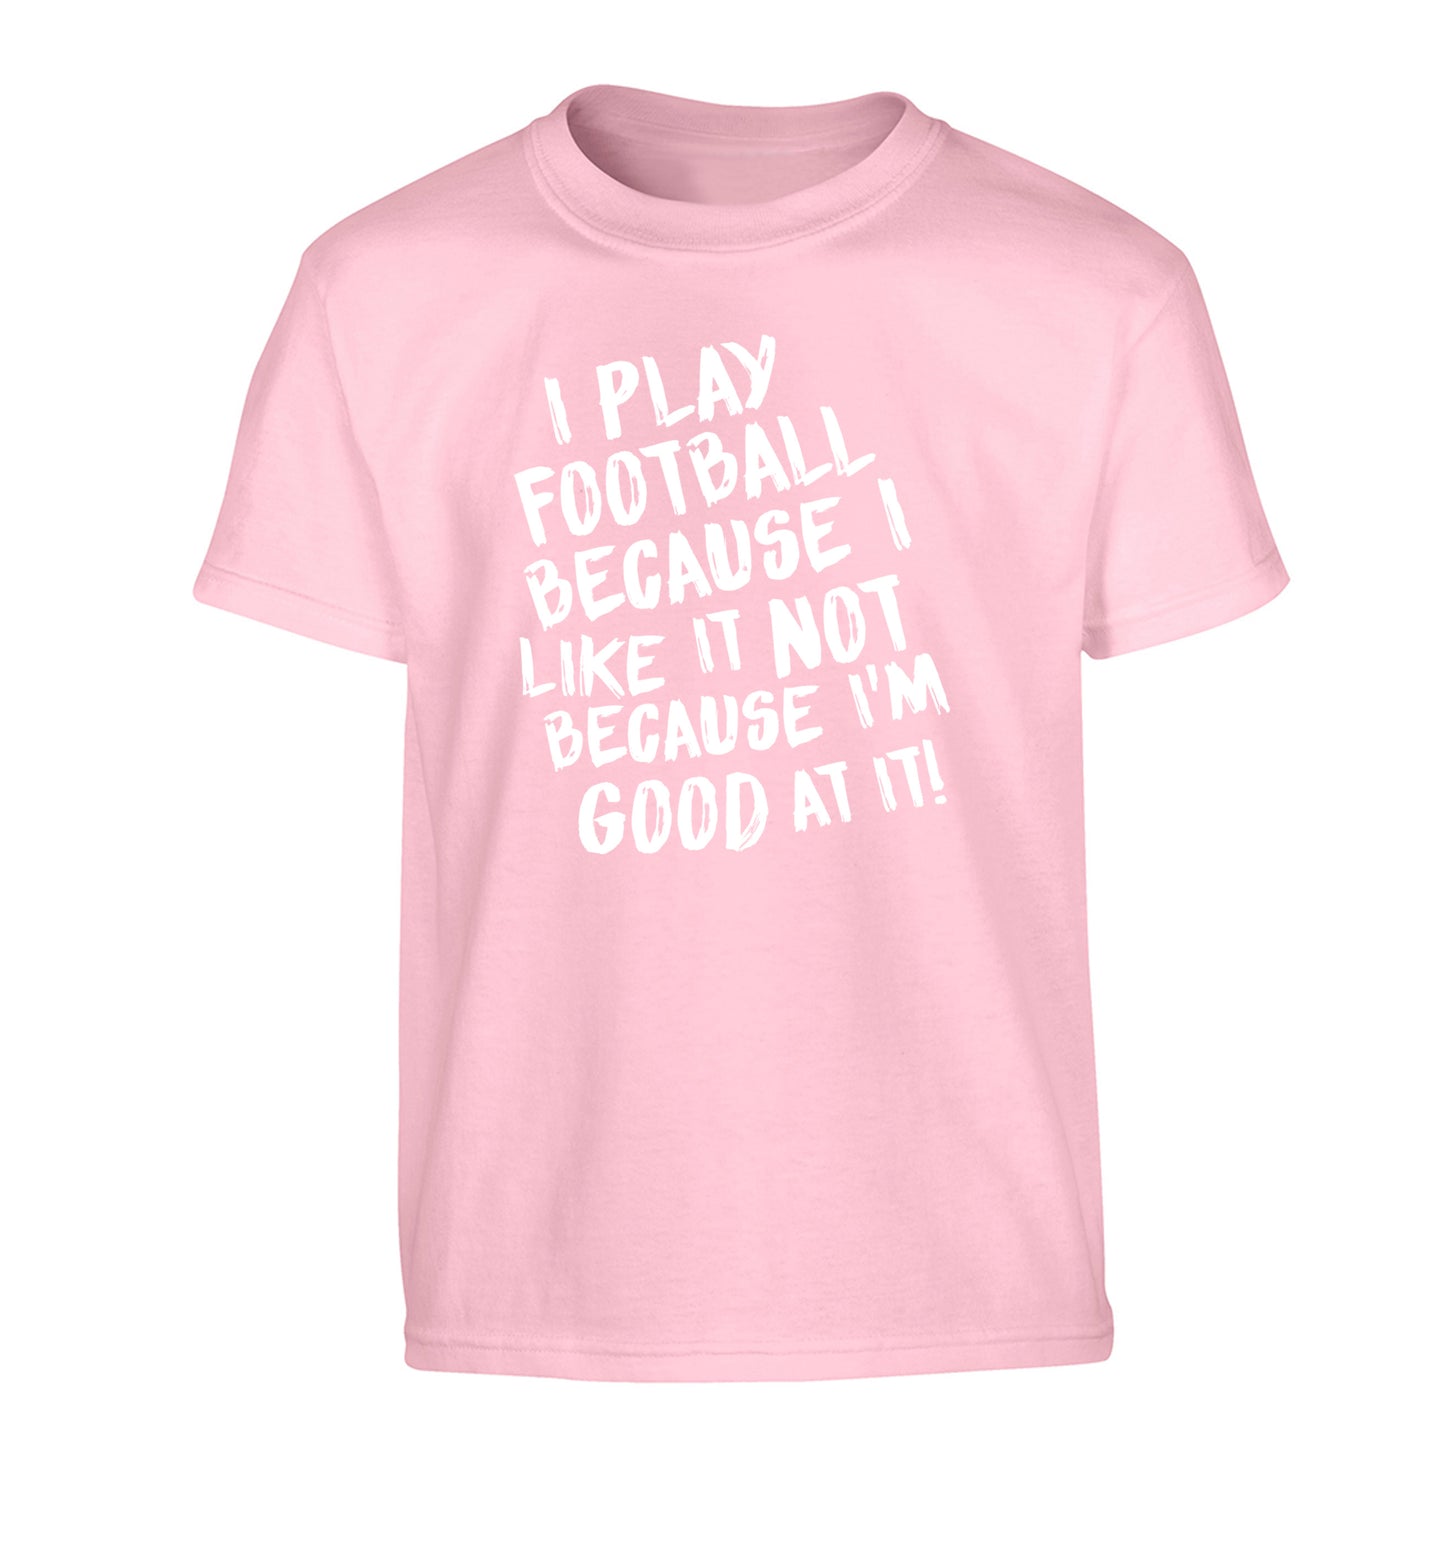 I play football because I like it not because I'm good at it Children's light pink Tshirt 12-14 Years